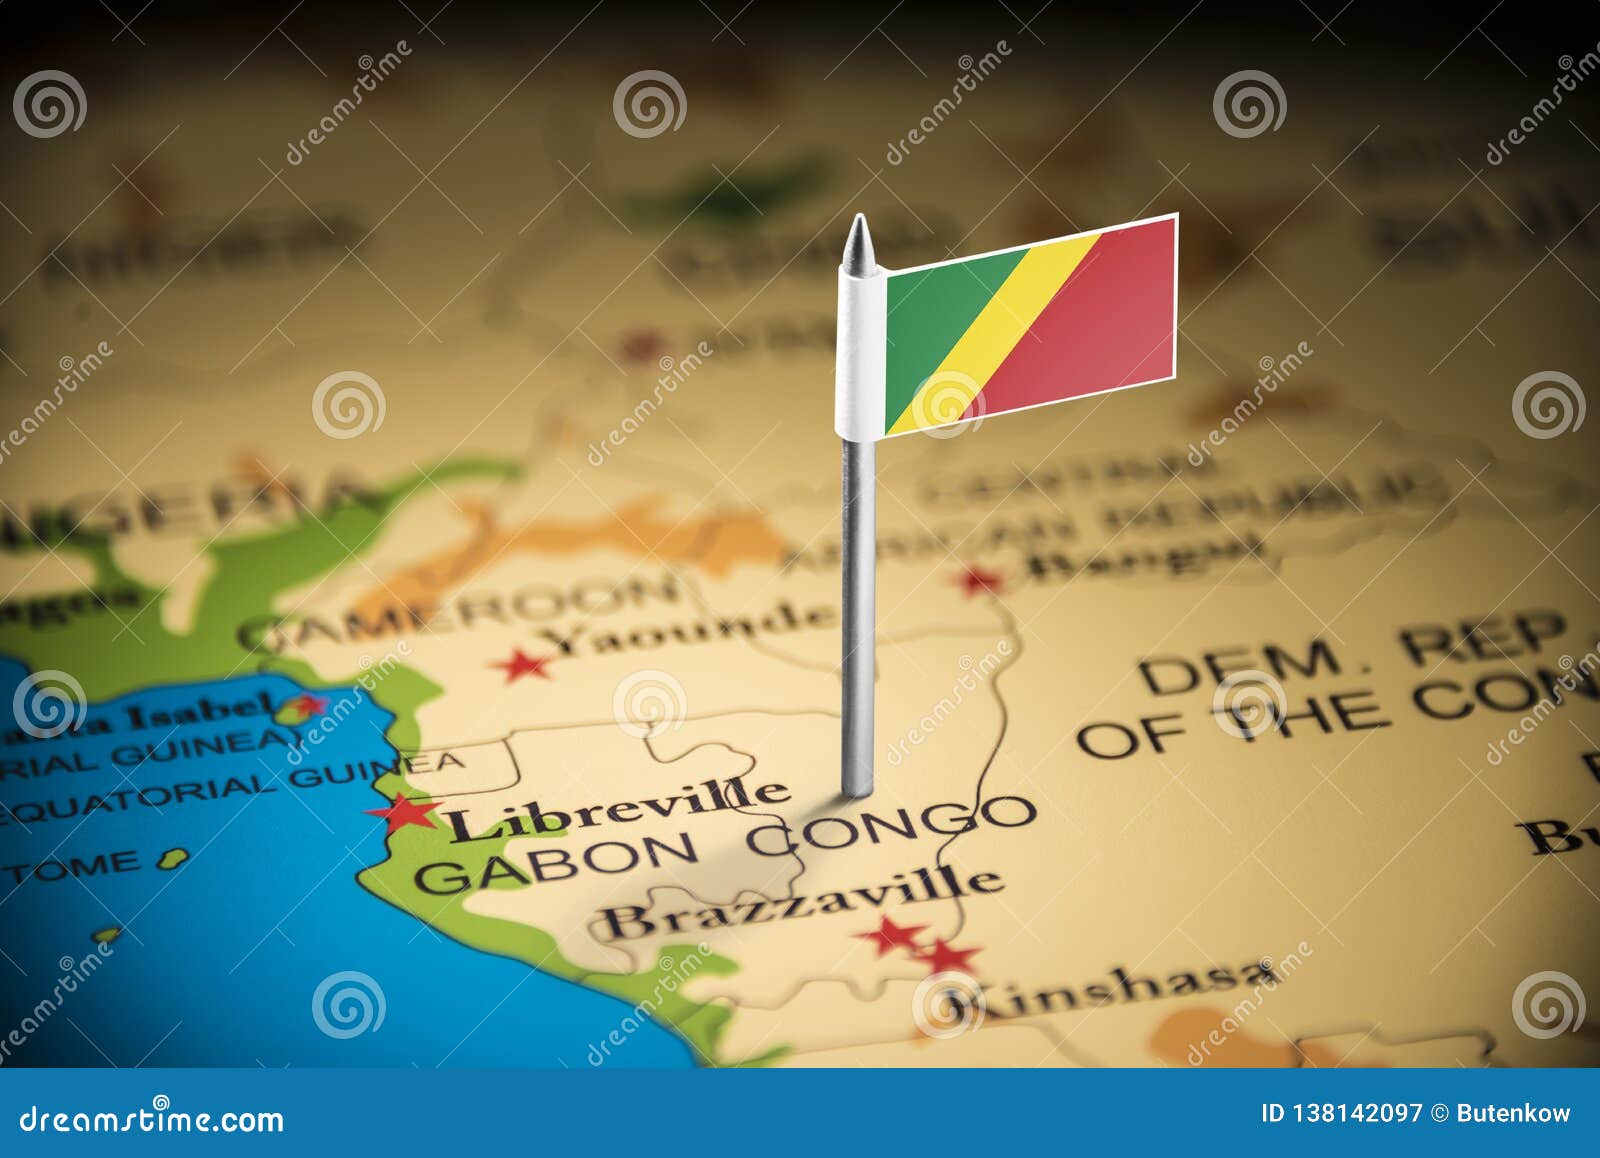 congo marked with a flag on the map